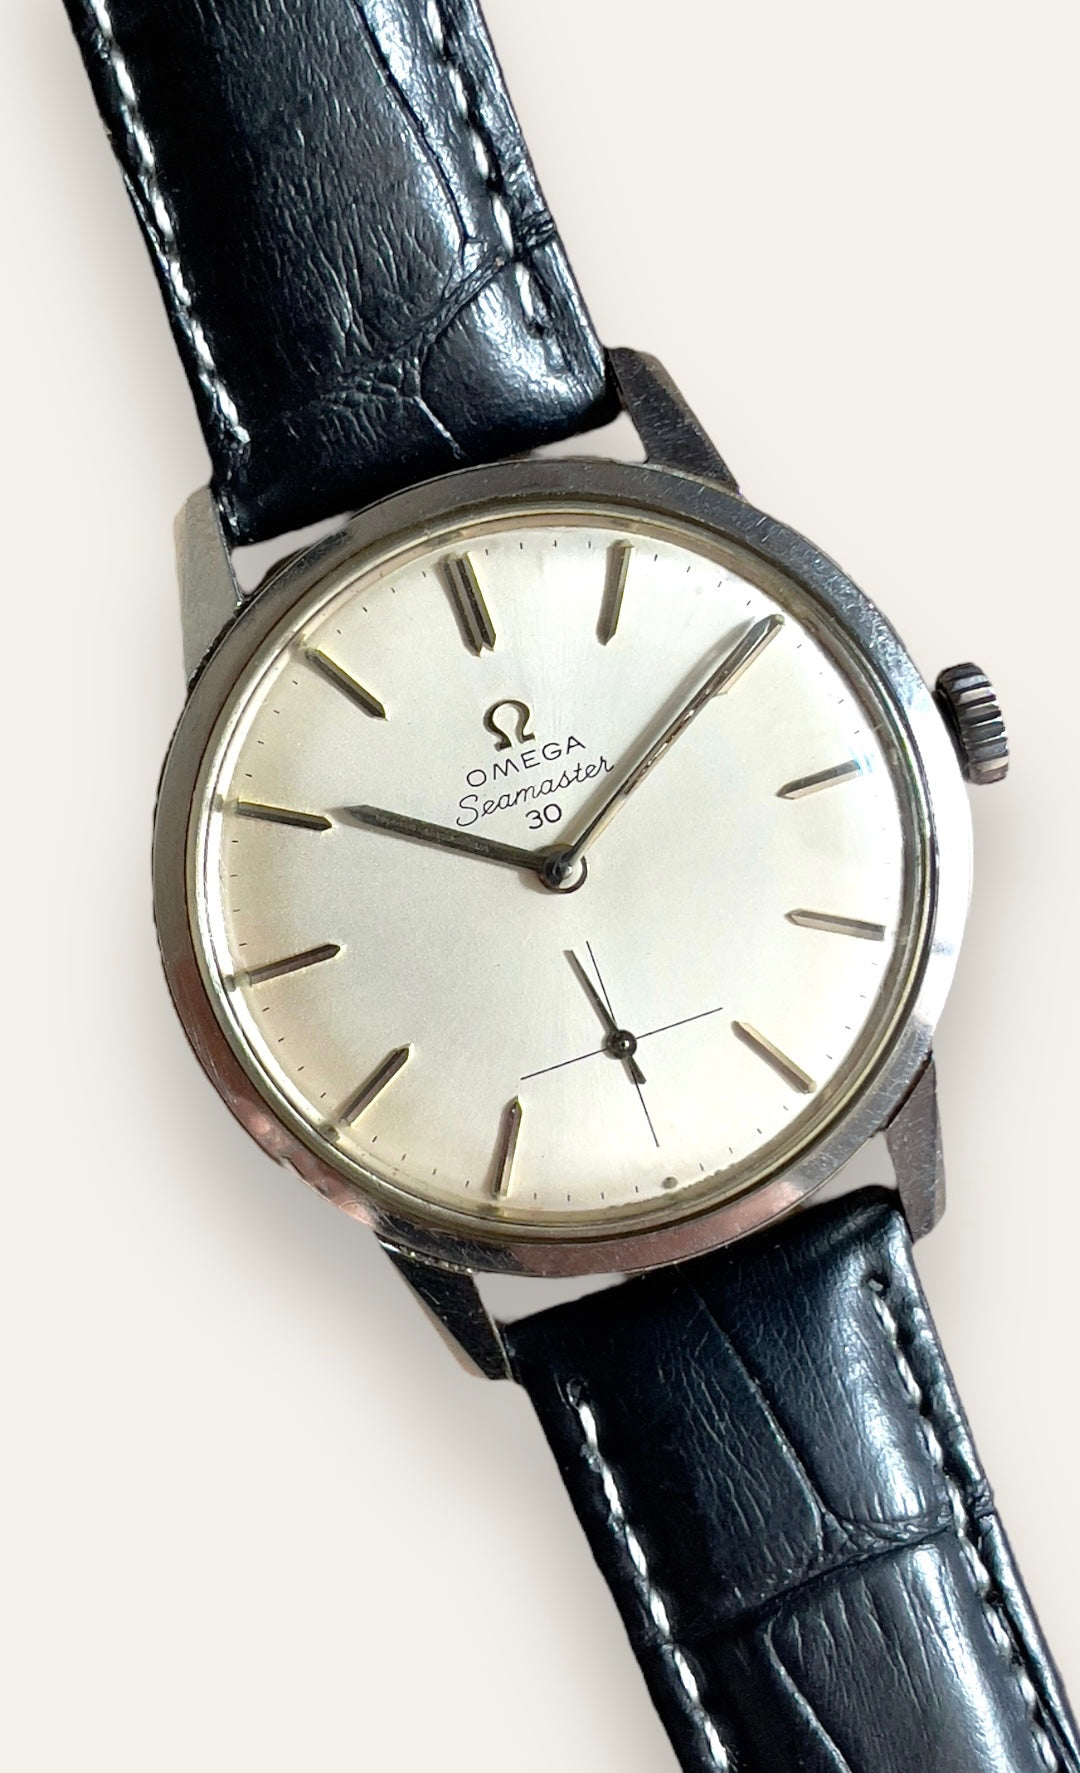 (SOLD OUT) Omega Seamaster 30